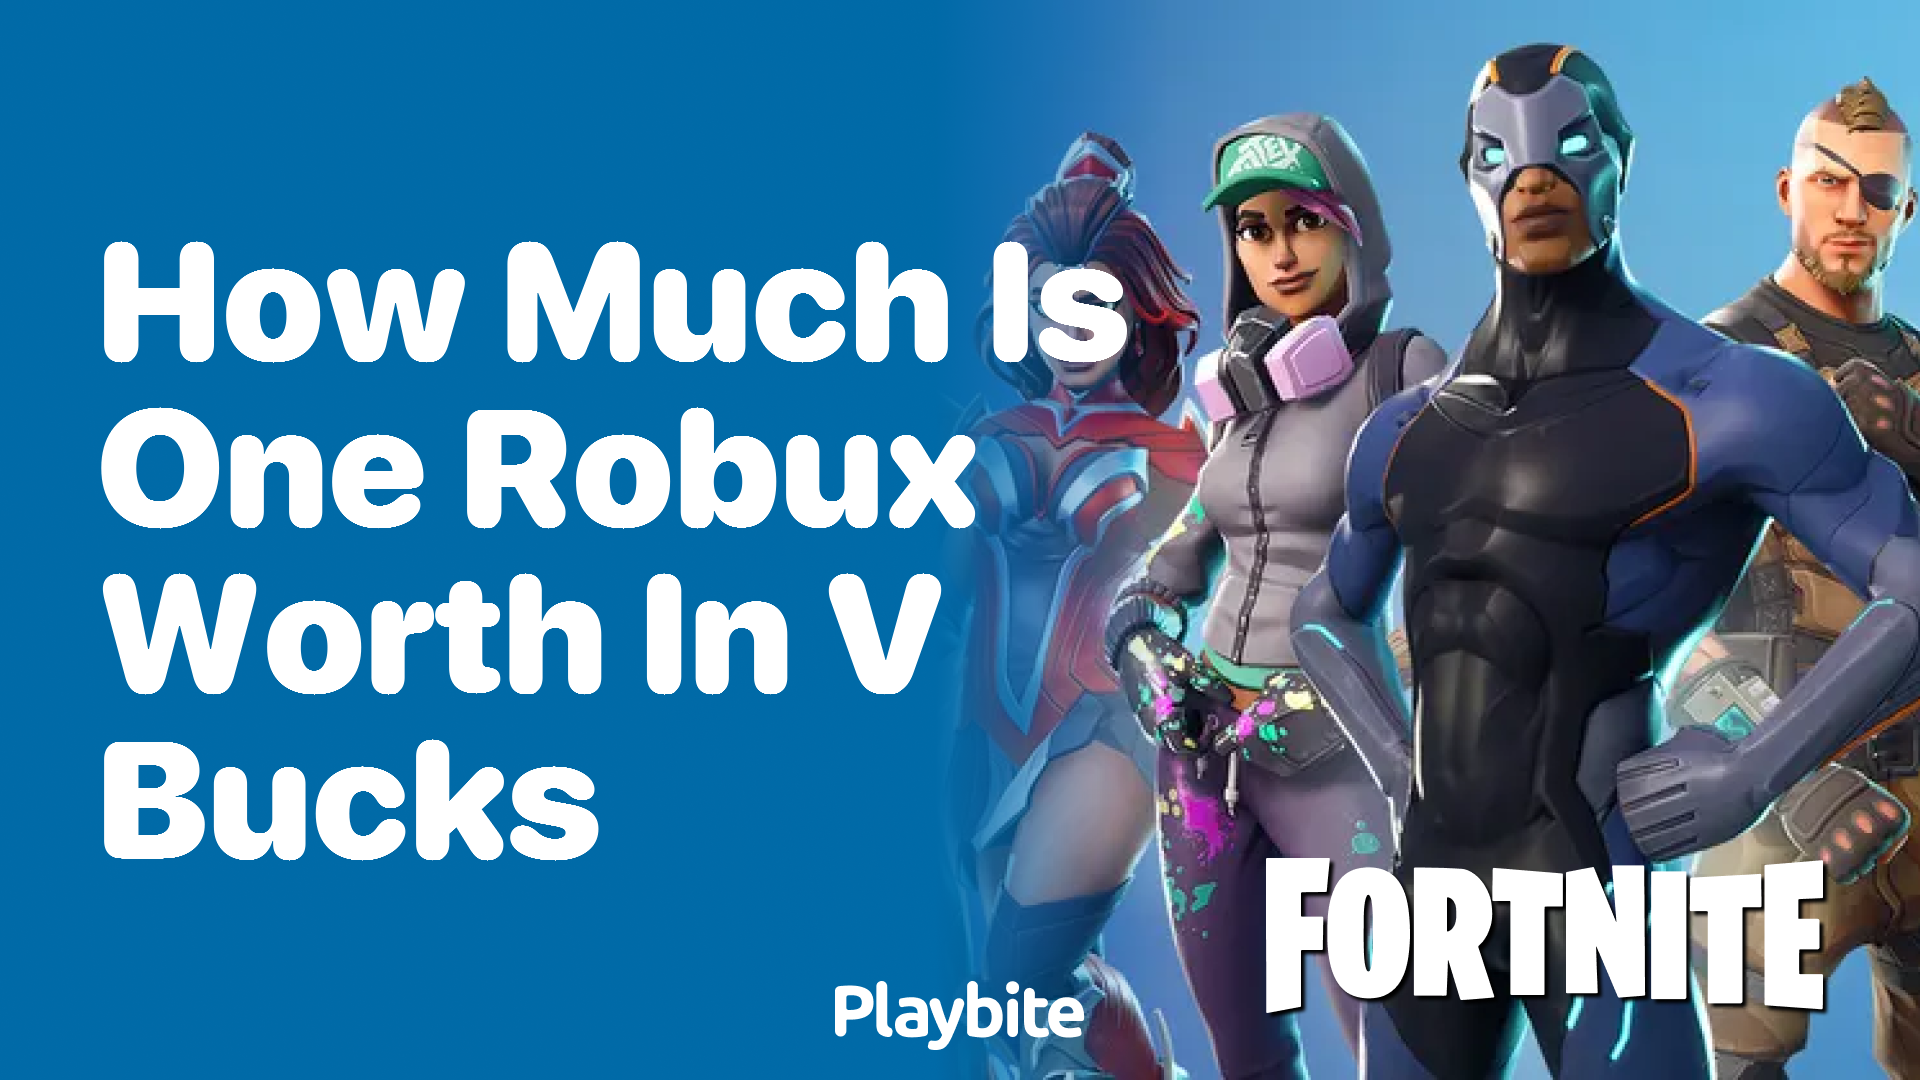 How Much Is One Robux Worth in V-Bucks?